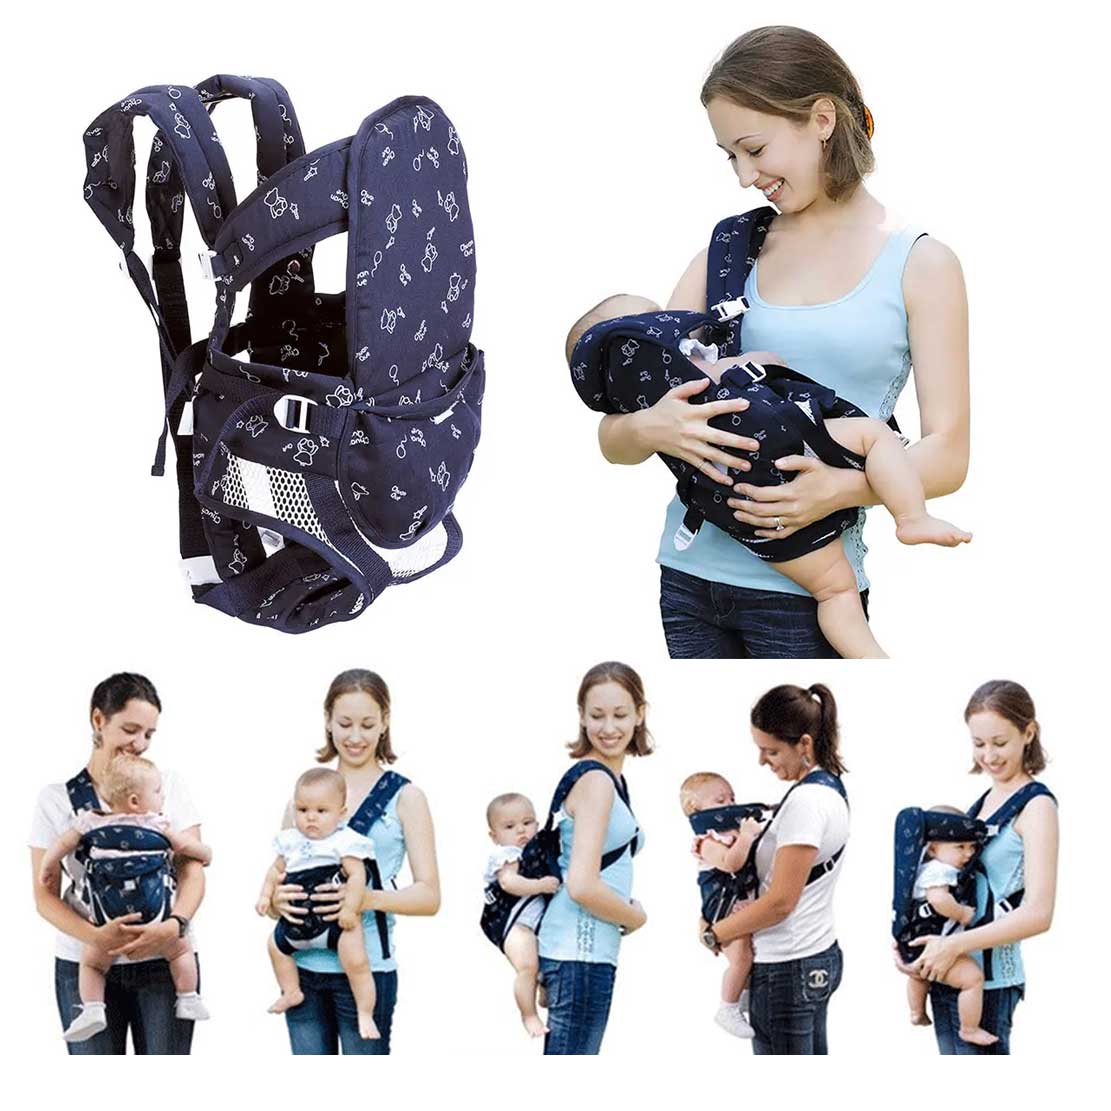 Baby Care 6 In 1 Baby Carrier (0 – 30 Months)- Navy Blue